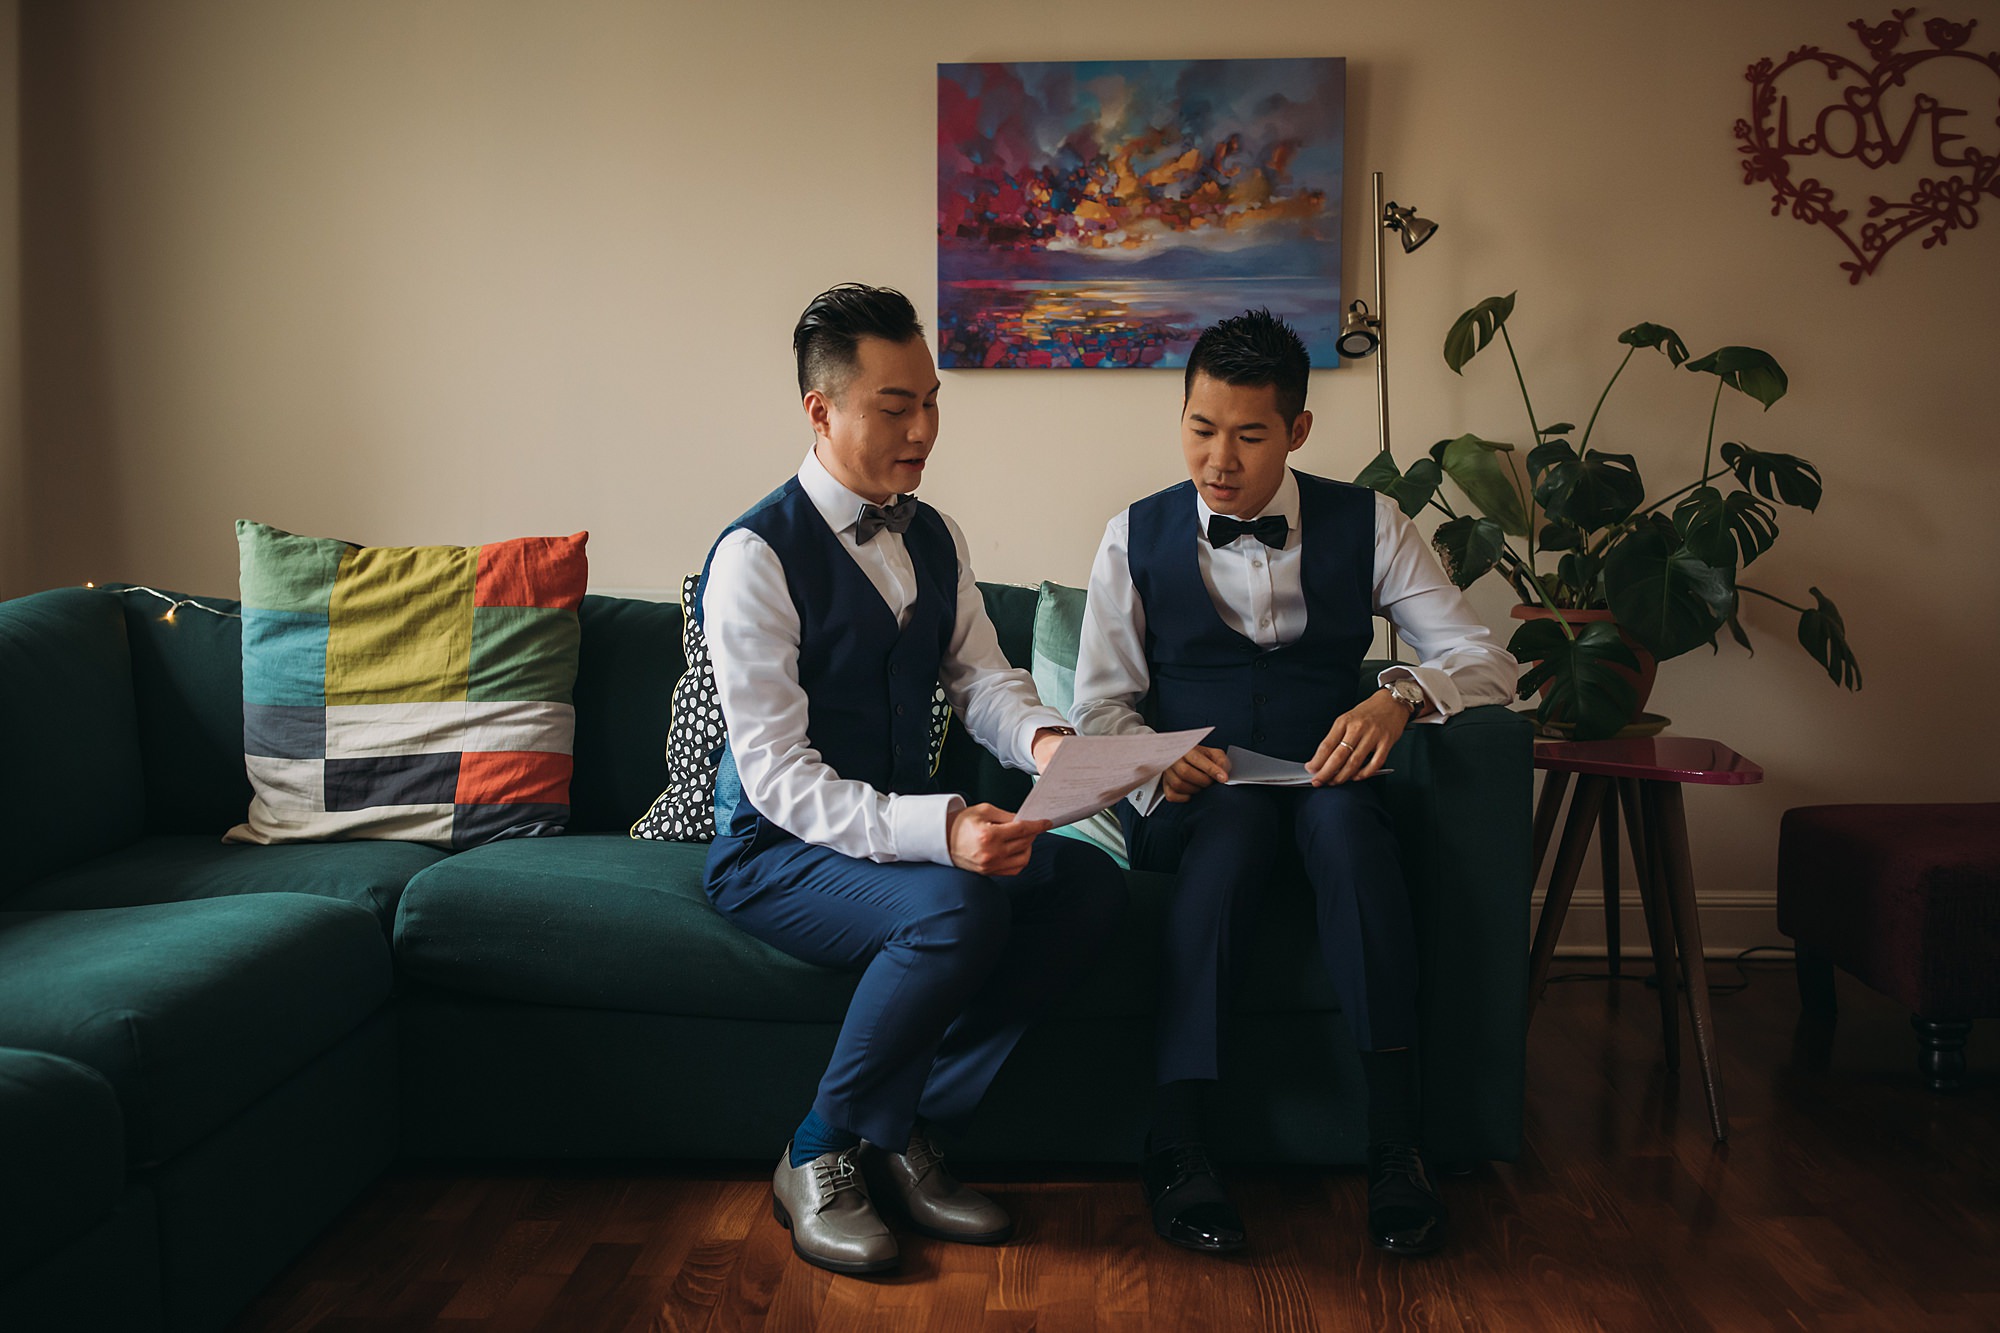 Two grooms go over their marriage ceremony ahead of their Glasgow elopement.